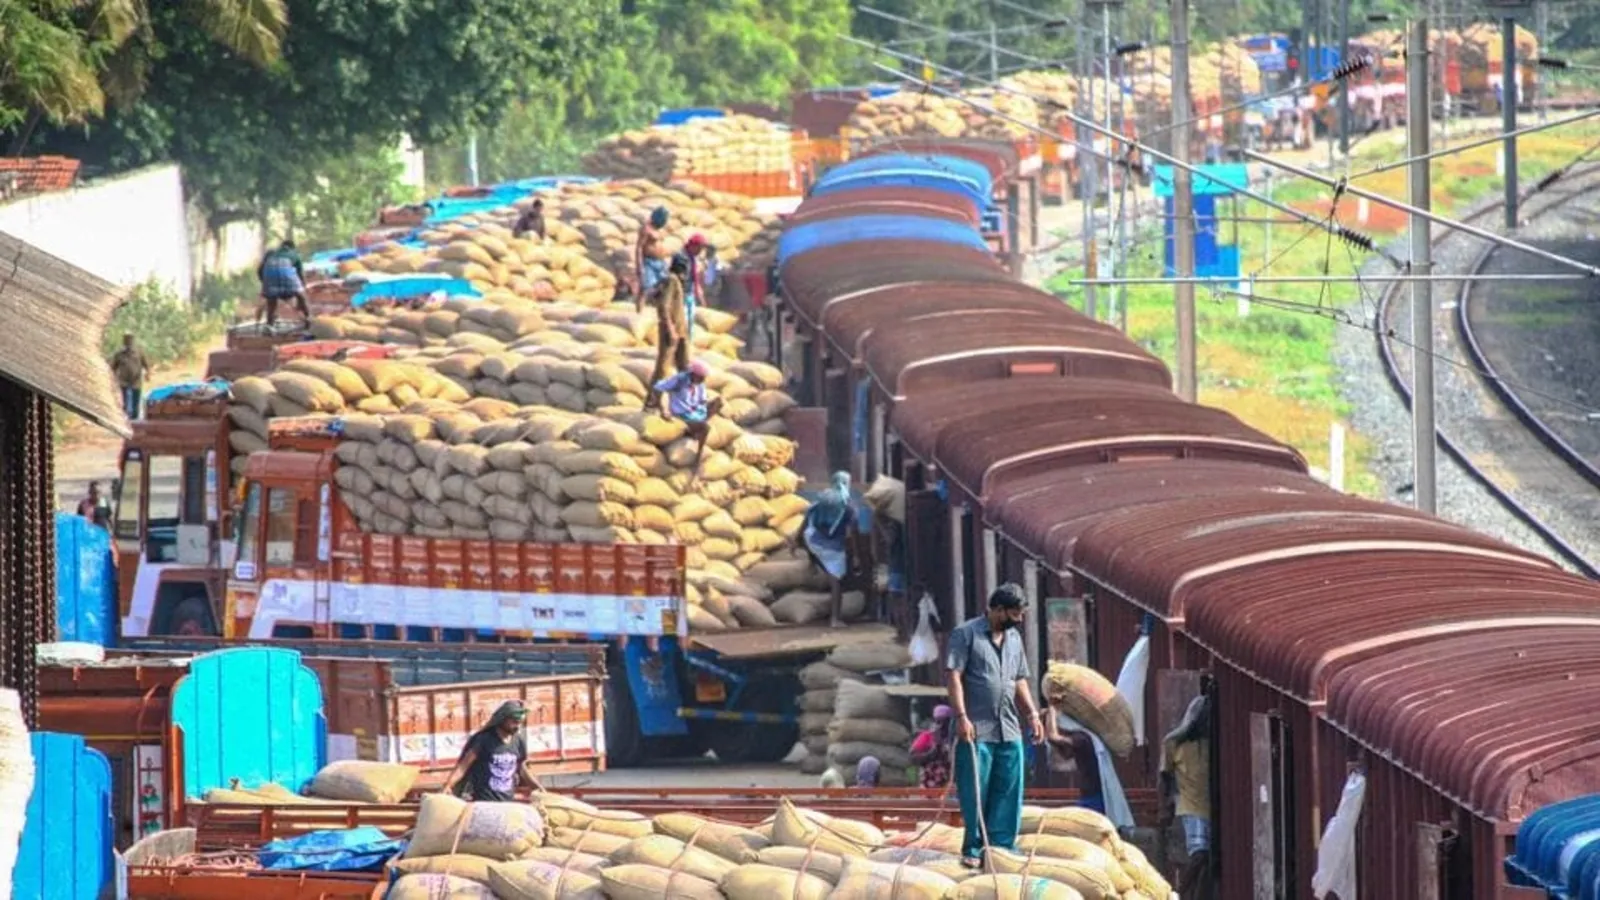 India gets opportunity to export wheat but risks remain